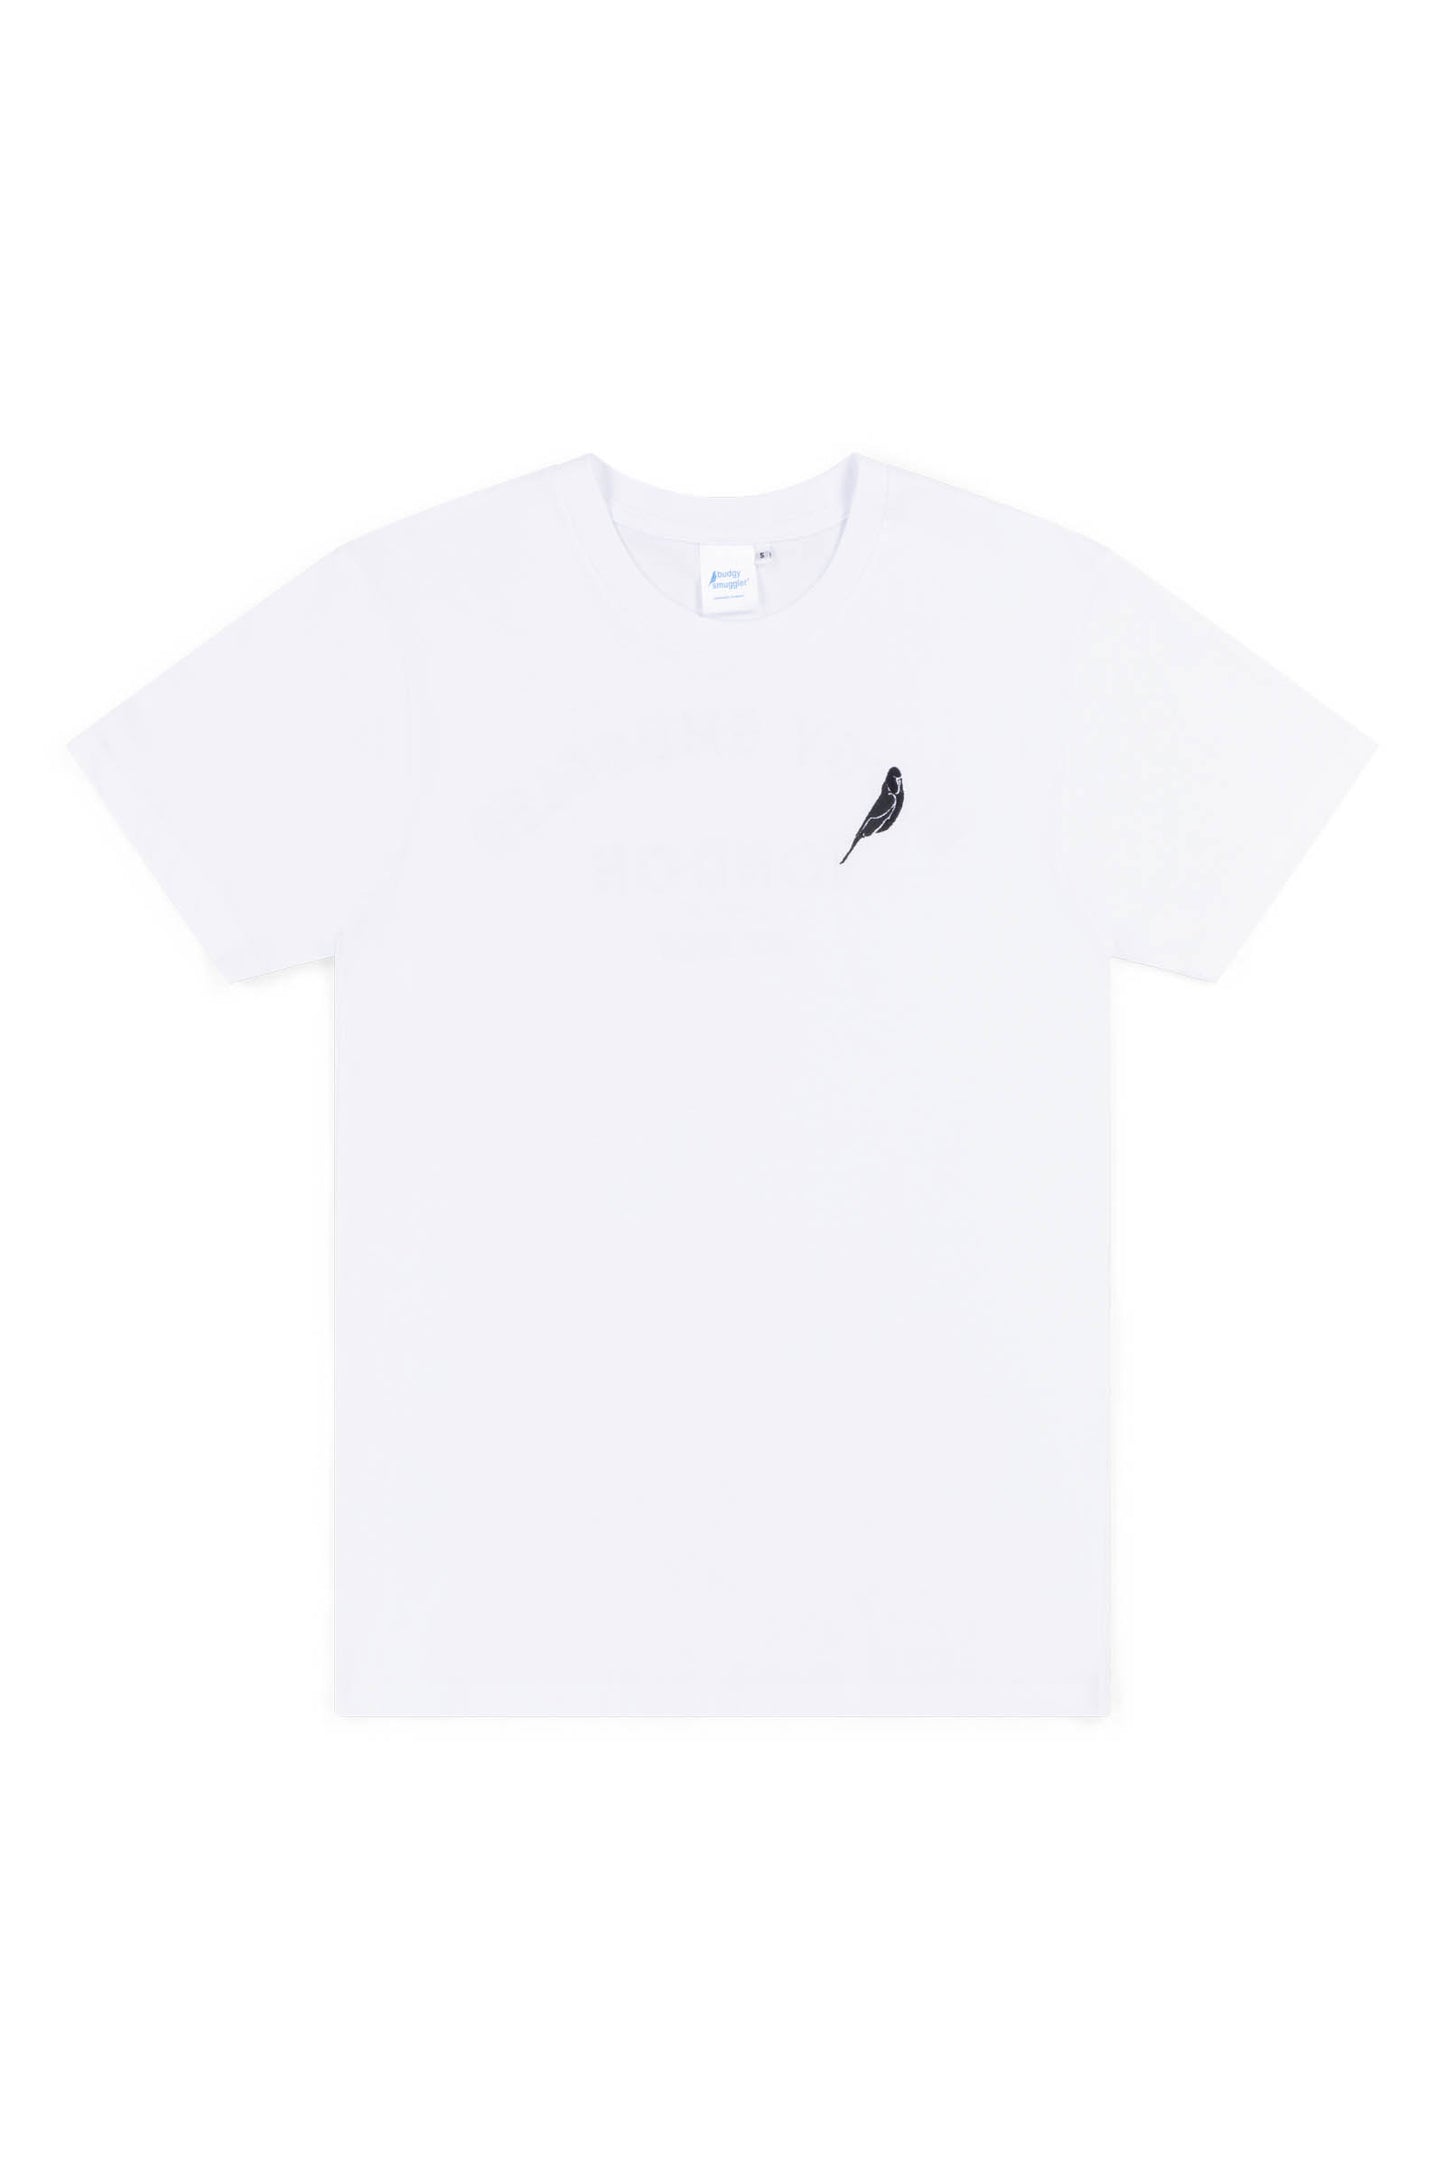 Budgy London Tee in White